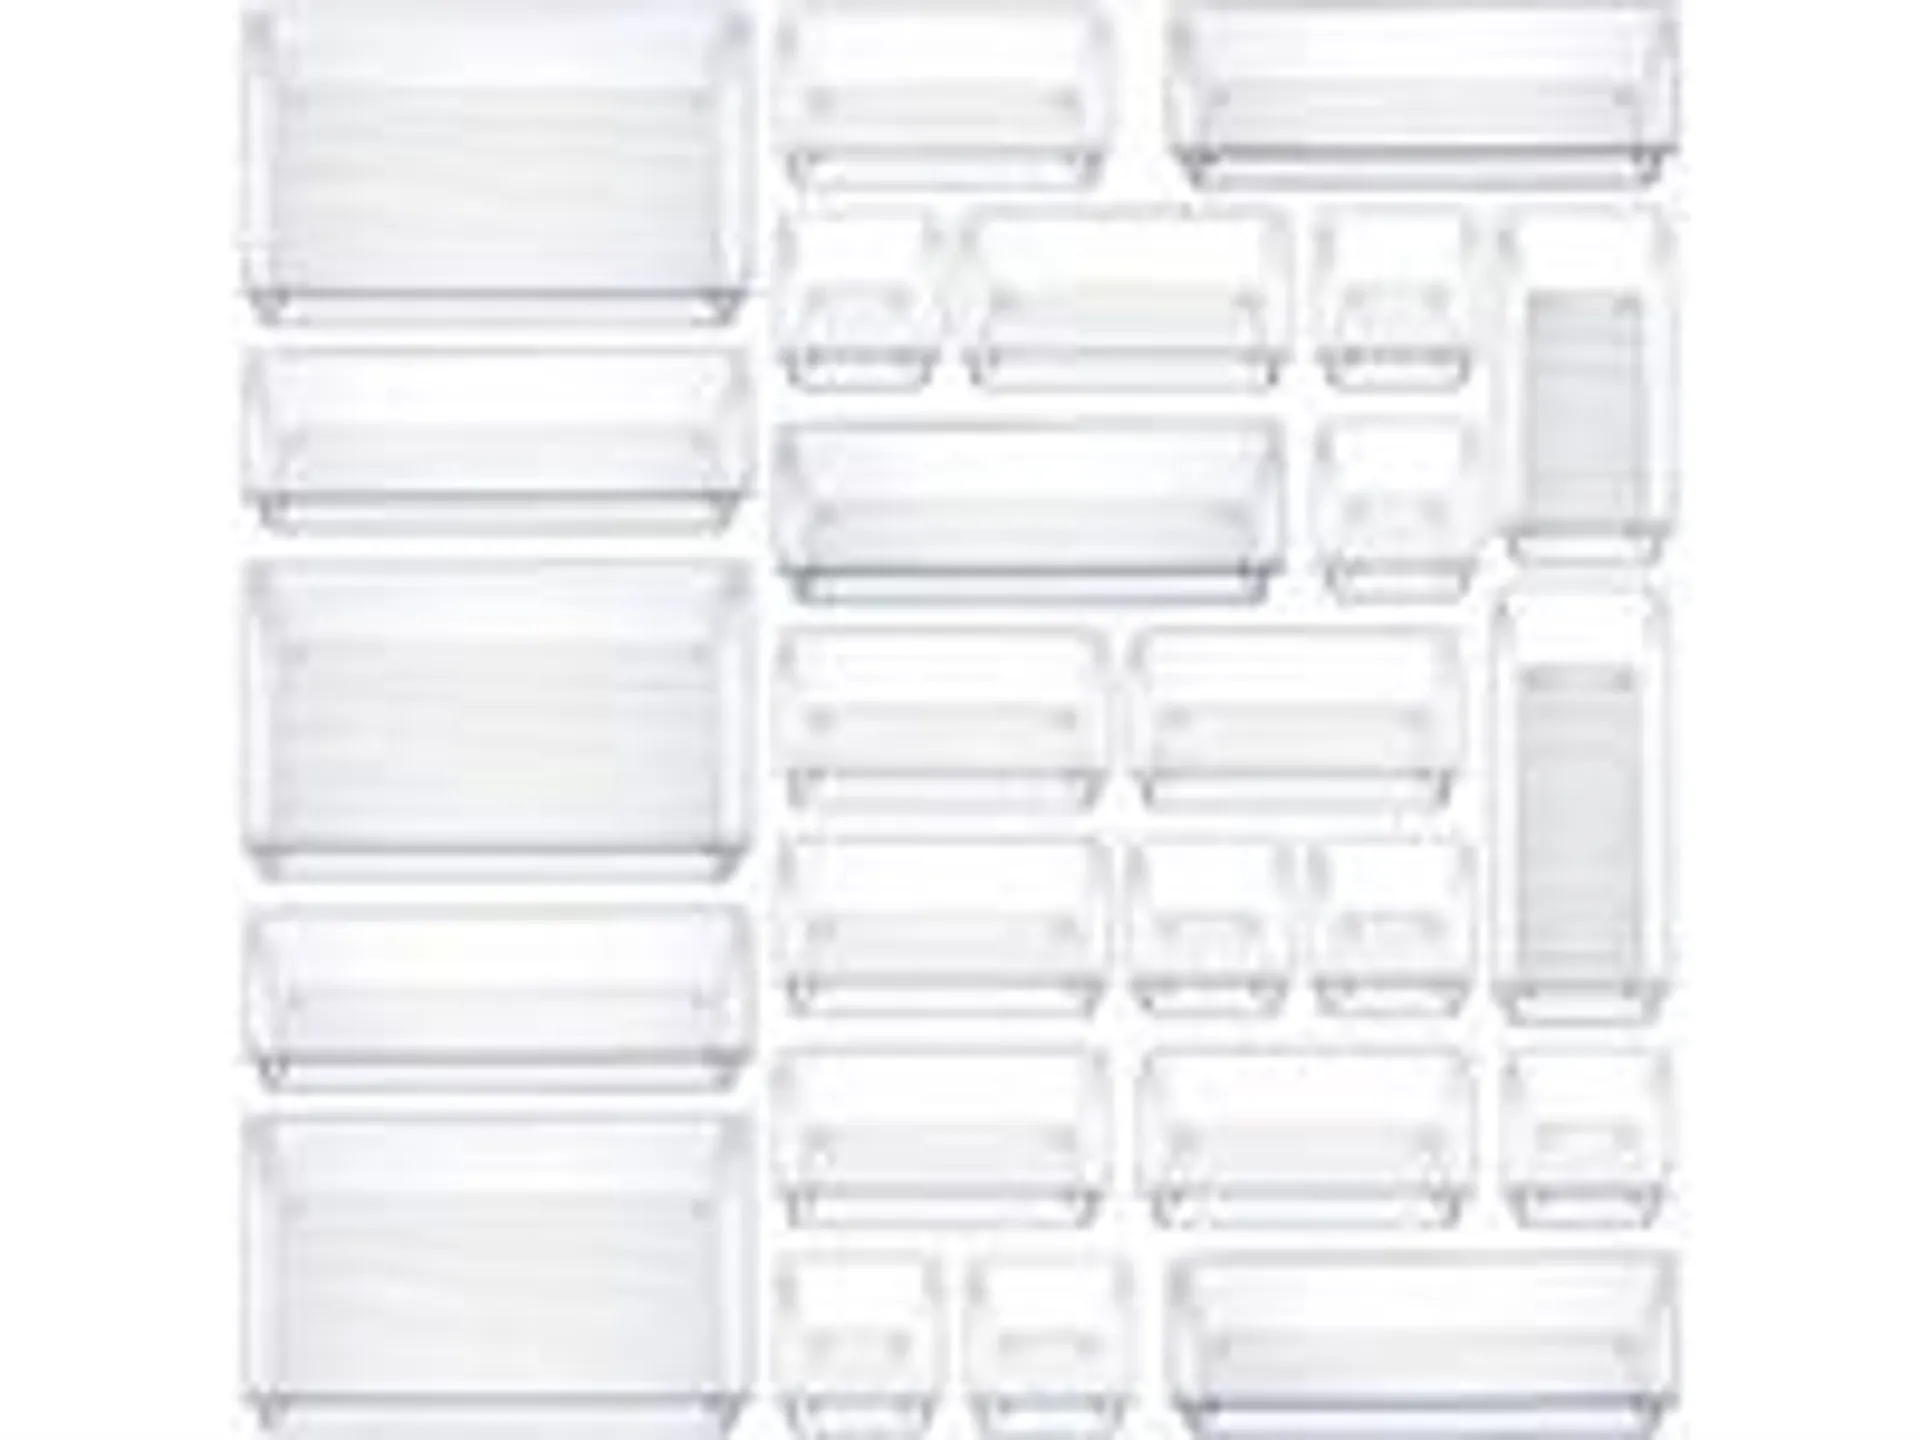 MPM 25pcs Drawer Organizer, 4 Sizes Clear Plastic Desk Divider Storage Bins, Multipurpose Trays, For Organization of Accessories, Gadgets for Kitchen, Bathroom, Bedroom, Makeup, Jewelry, Office